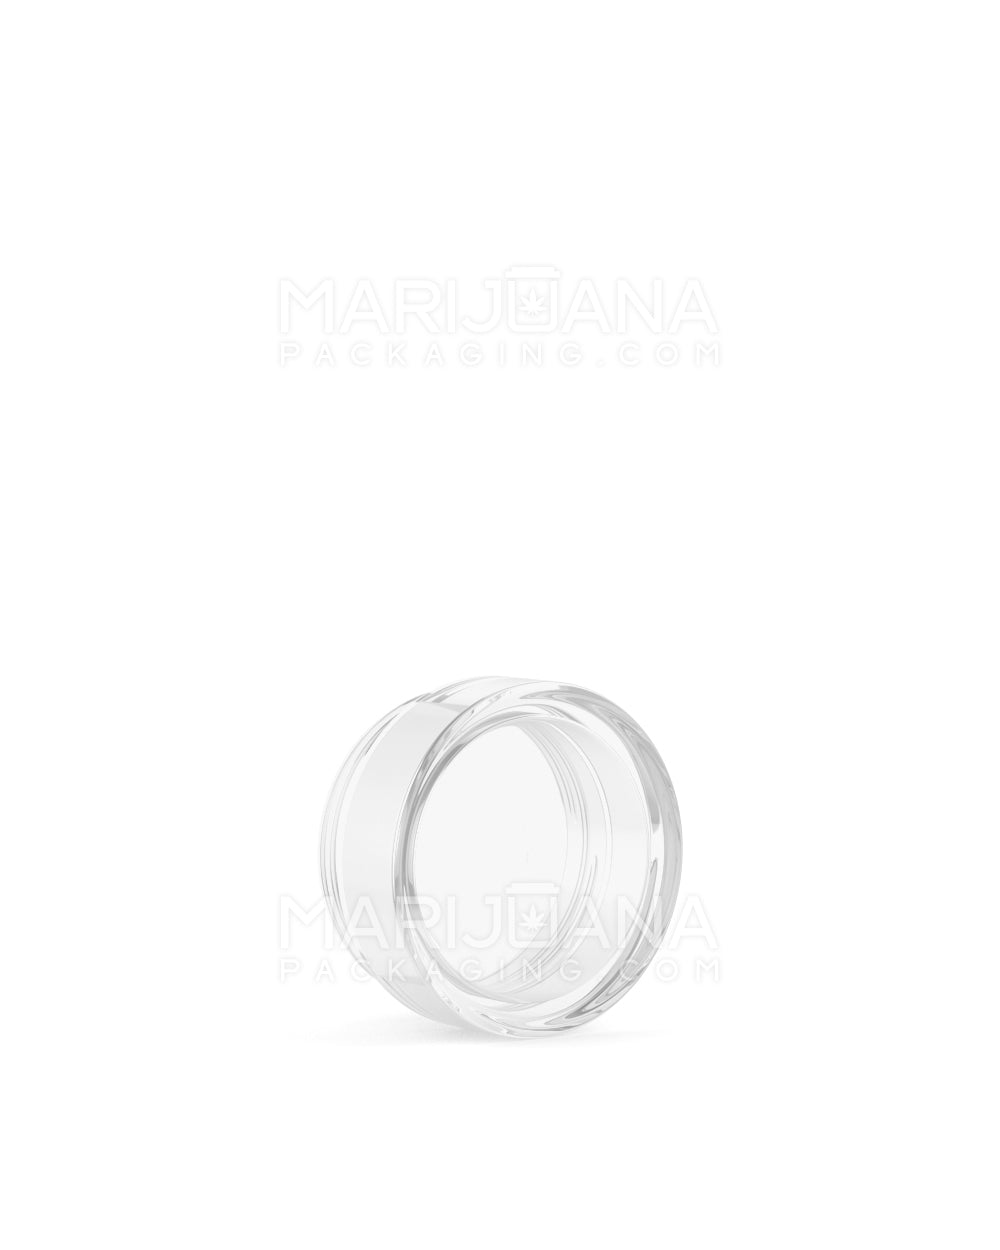 Clear Concentrate Containers w/ Screw Top Cap | 5mL - Plastic - 250 Count - 7